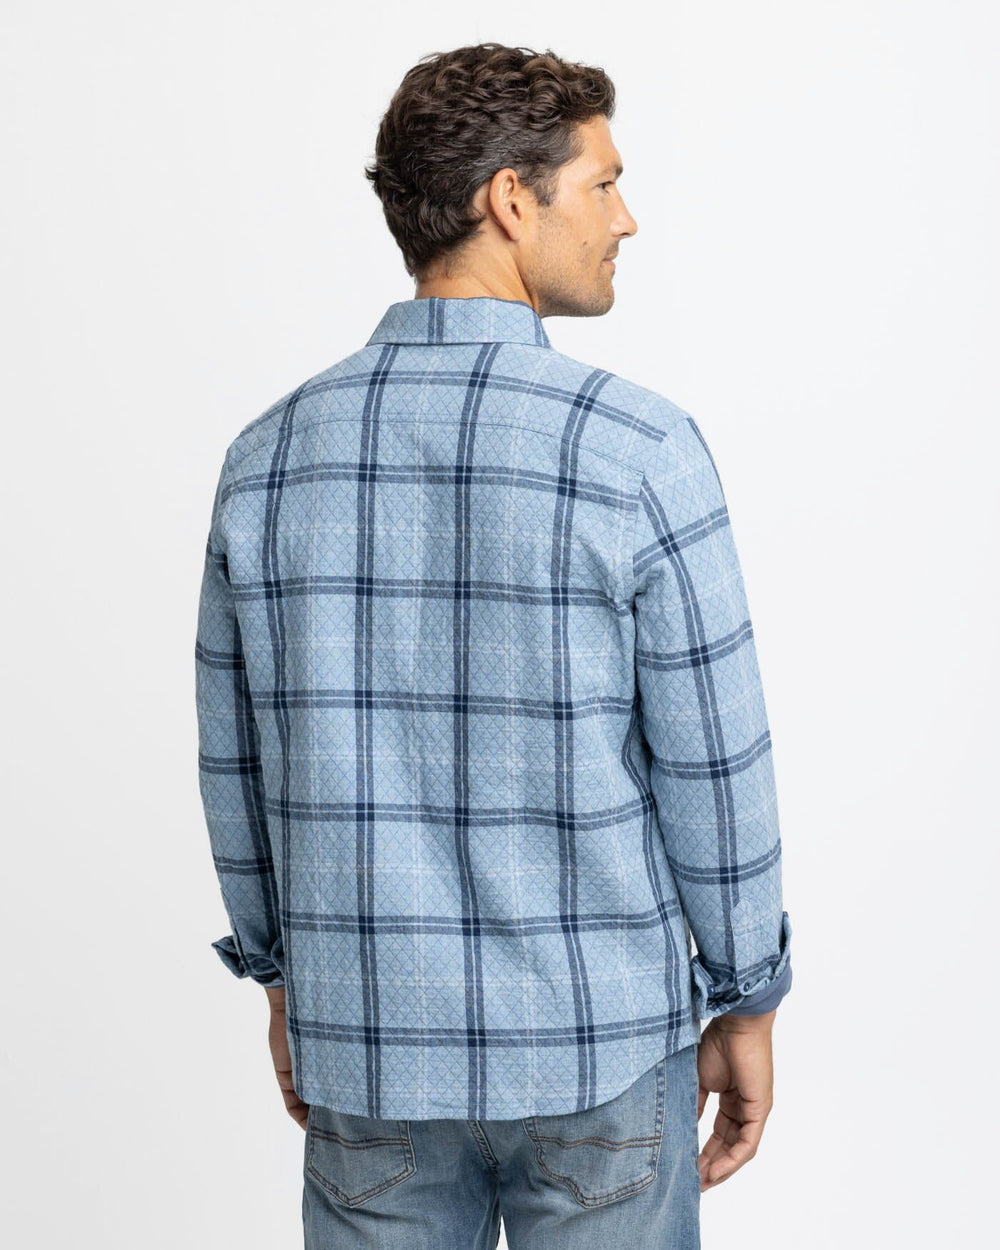 The back view of the Southern Tide Quilted Heather Ellison Plaid Overshirt Sport Shirt by Southern Tide - Heather Mountain Spring Blue